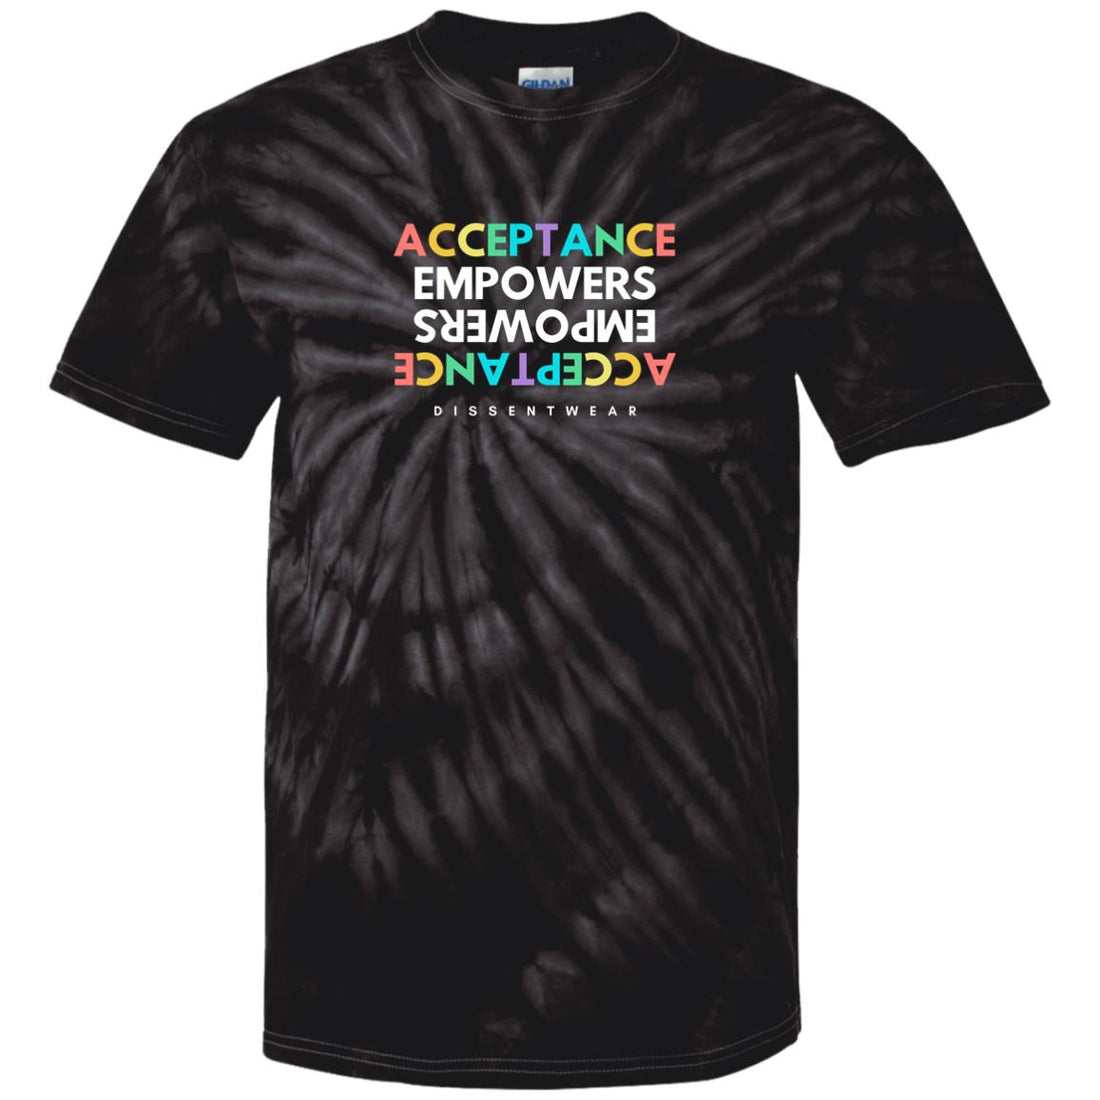 Acceptance Empowers Youth Tie Dye Tee